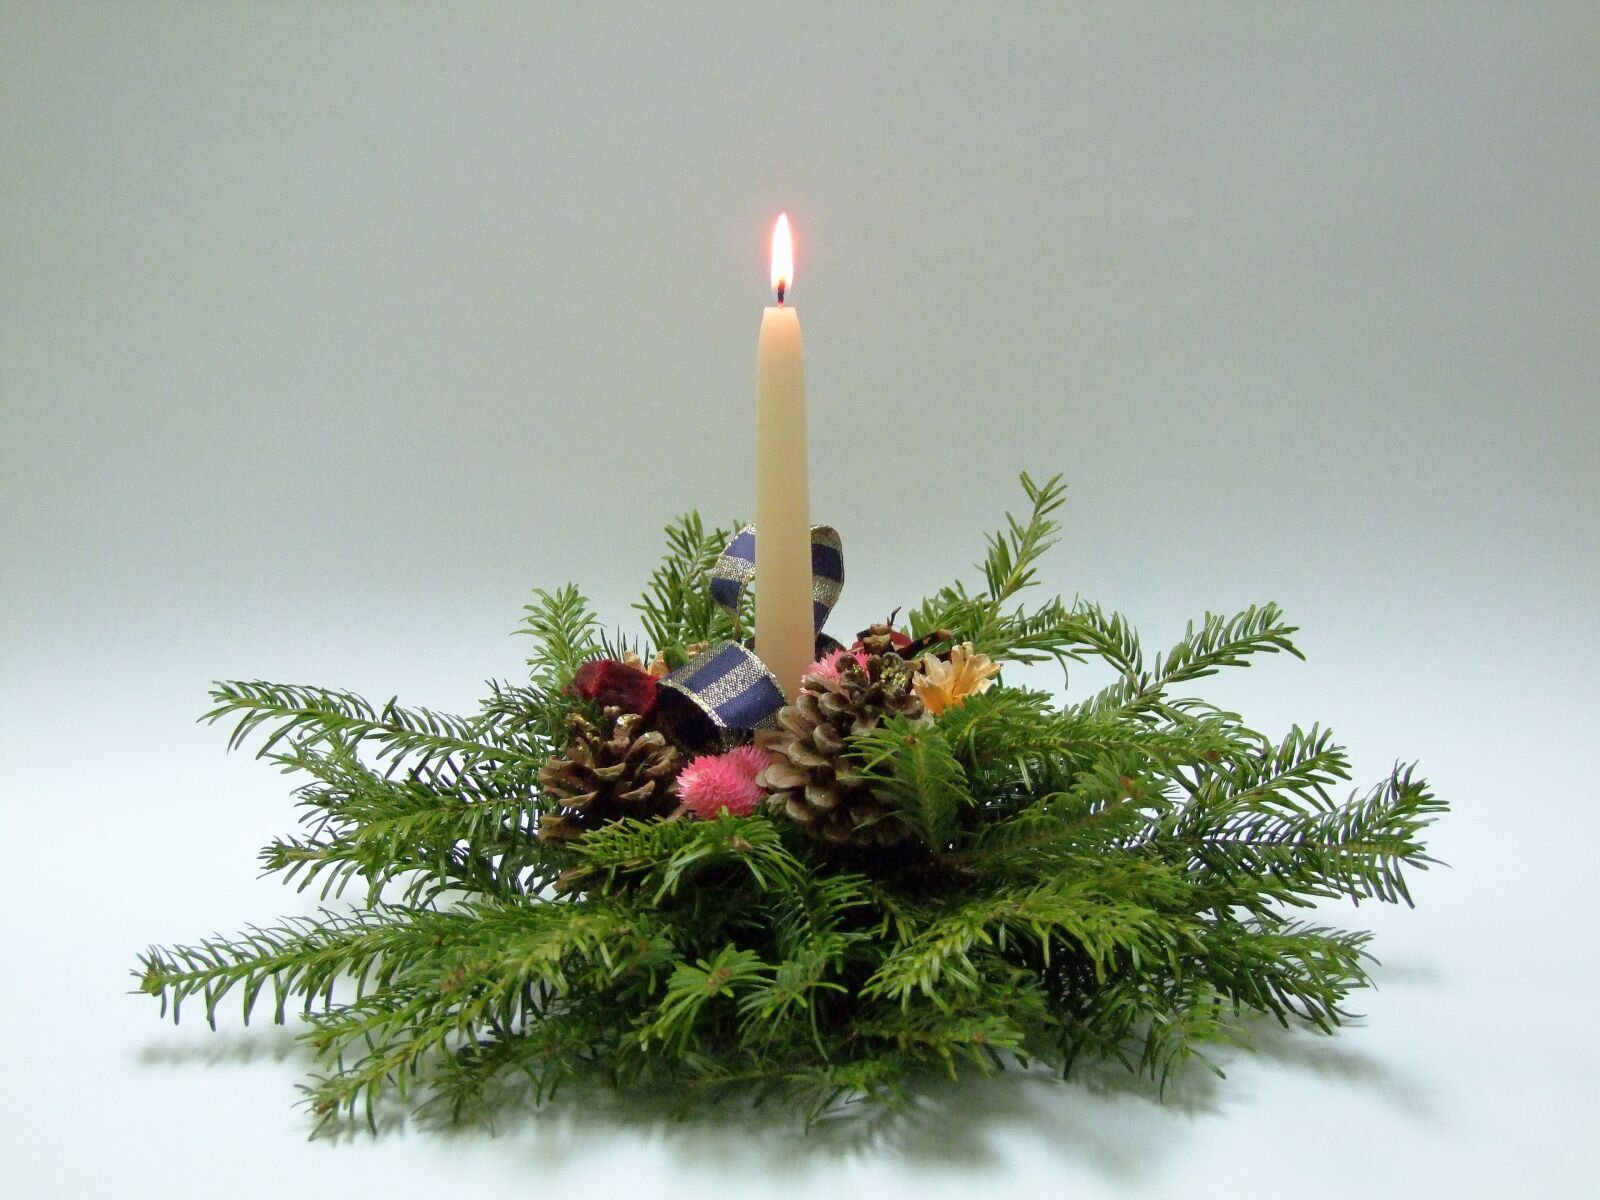 Fujifilm FinePix S100fs sample photo. Candle, flame, pine photography